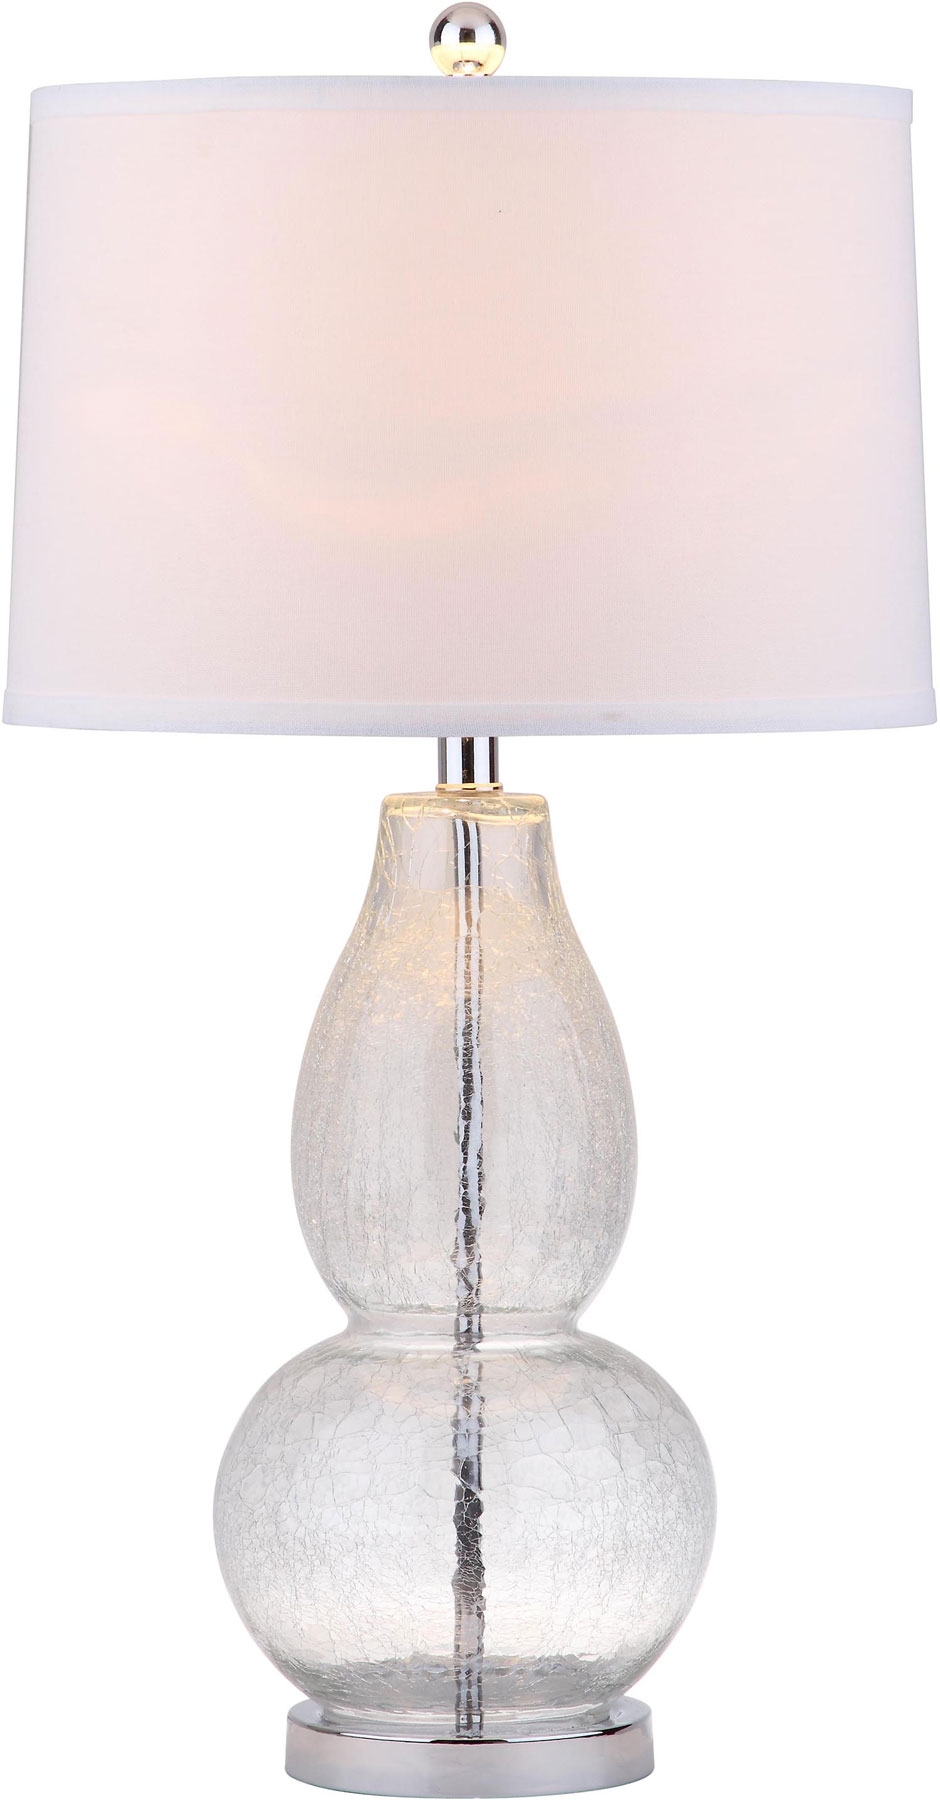 Mercurio 28.5-Inch H Double Gourd Table Lamp - Clear - Arlo Home - Image 1